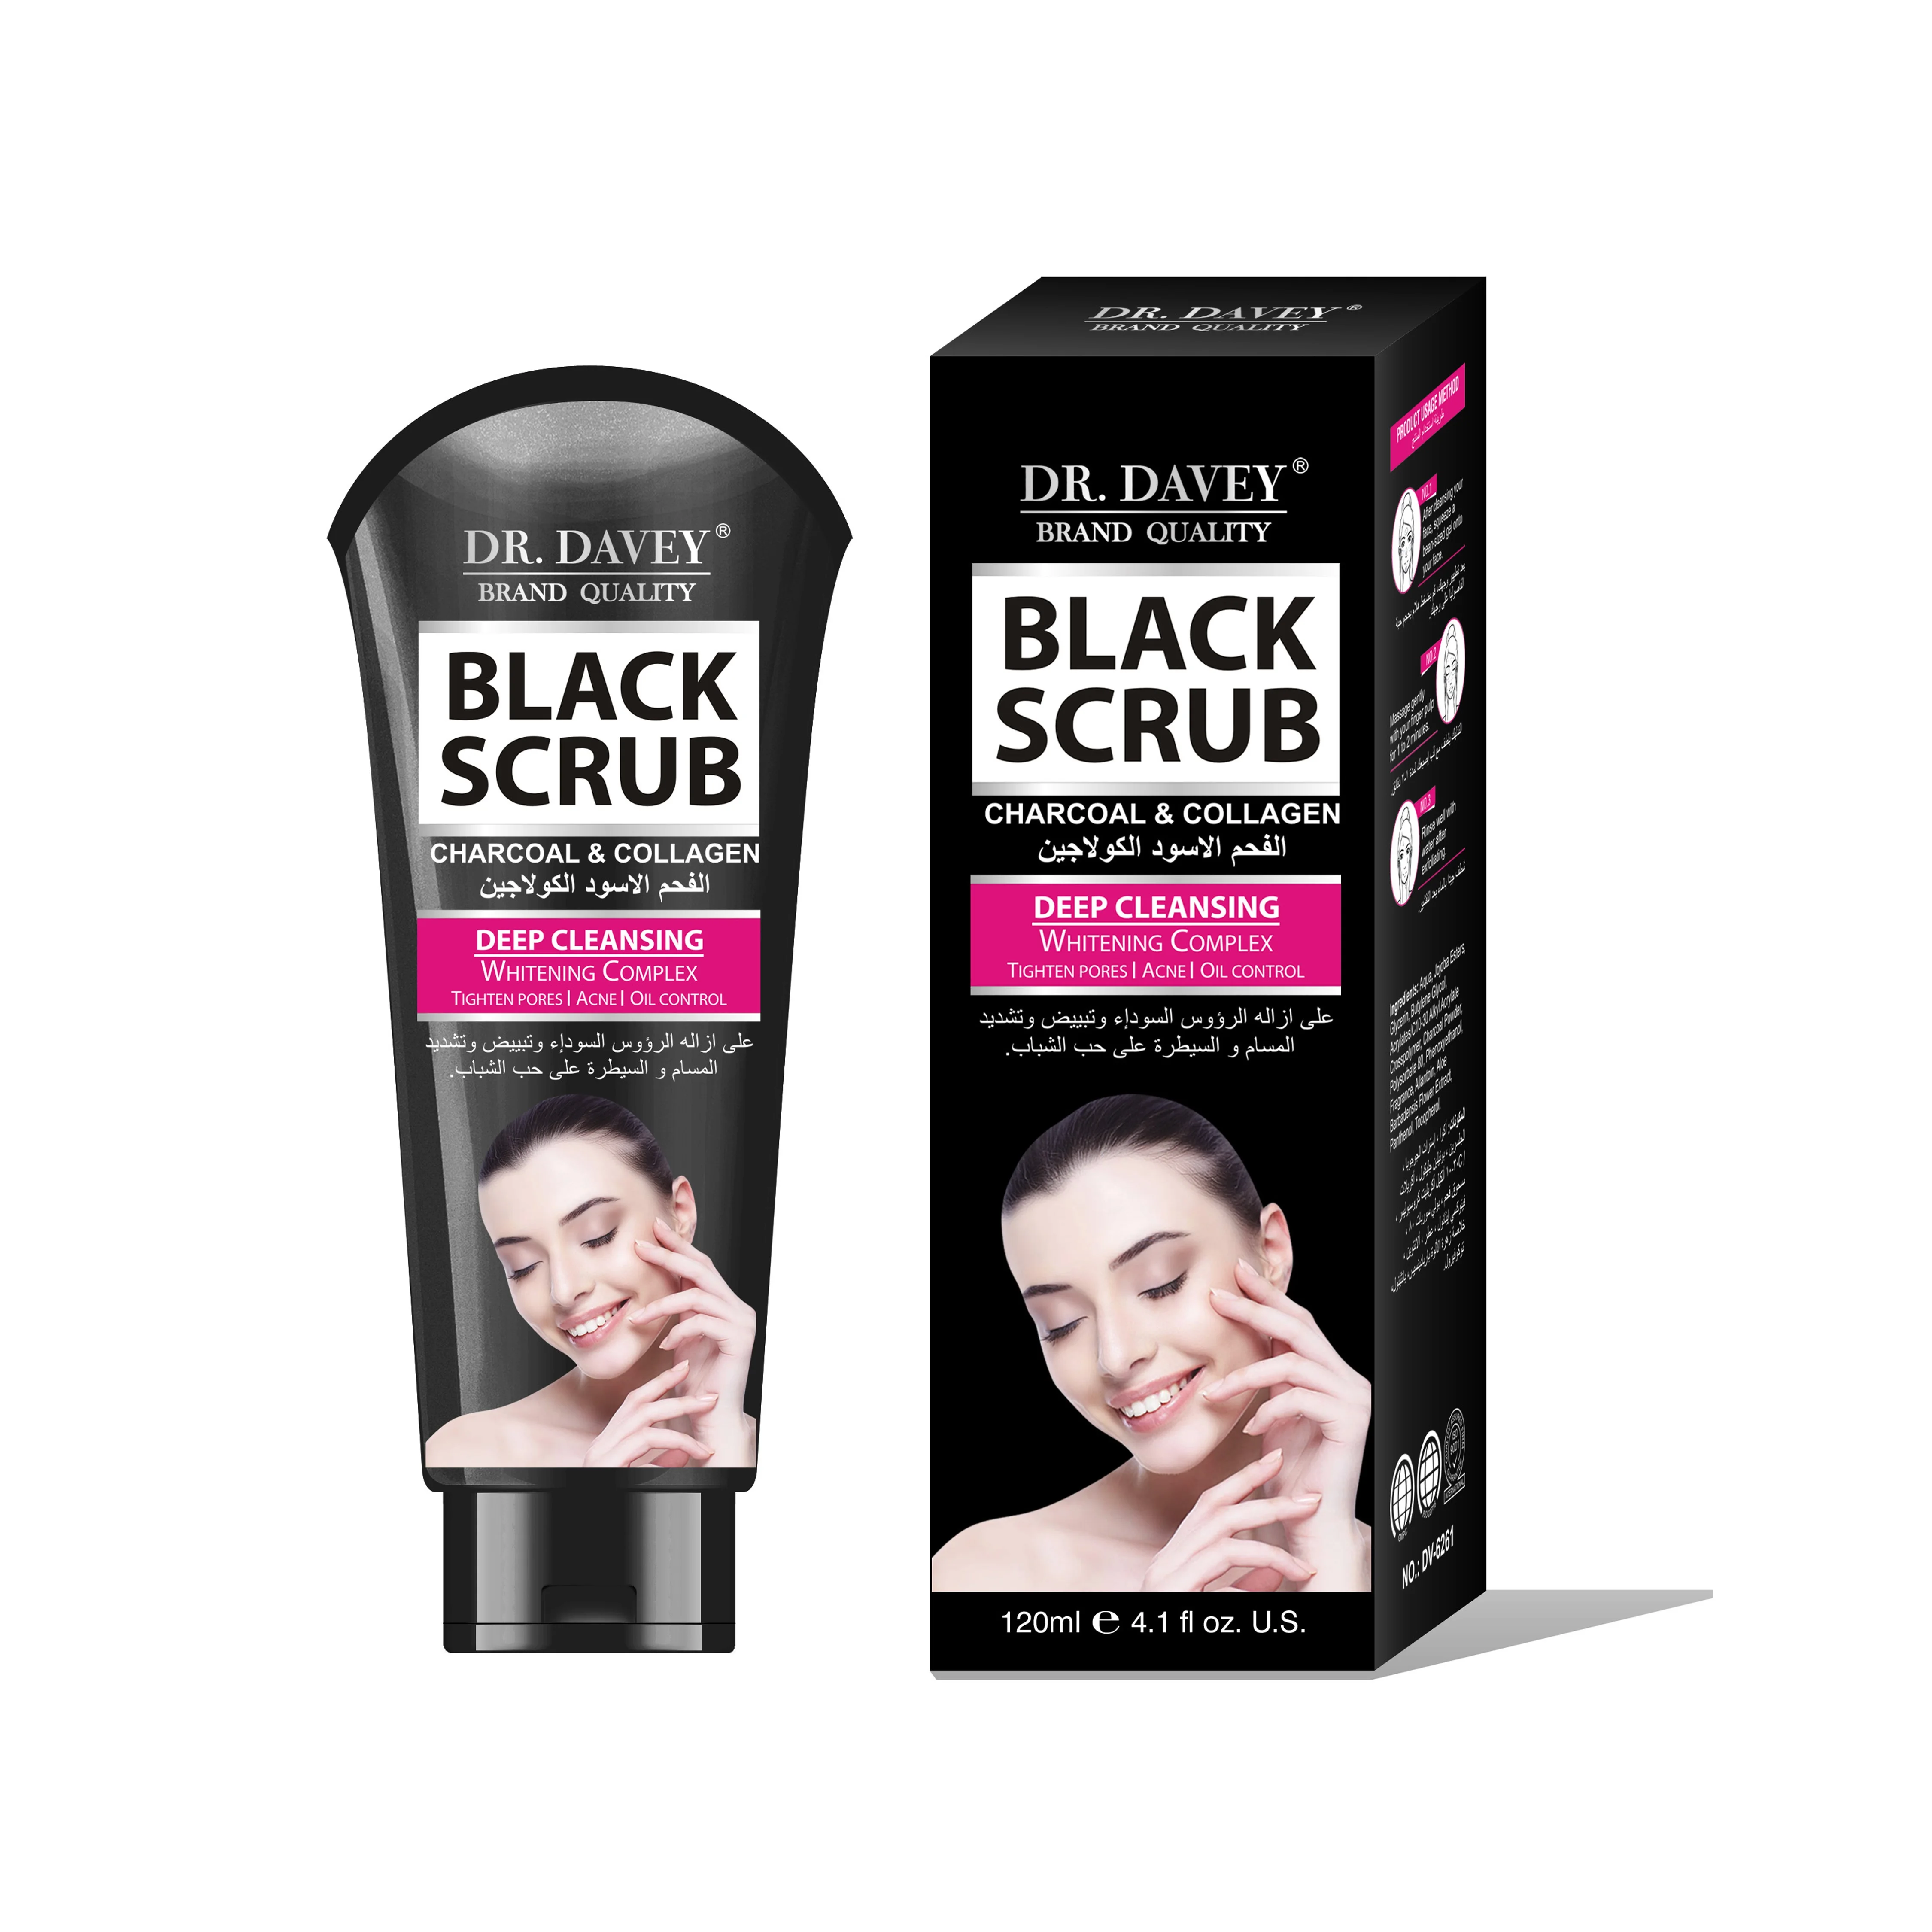 

DR.DAVEY Black Face Scrub Charcoal and Collagen Deep Cleansing Whitening Skin Dead Skin Remover, Transparent